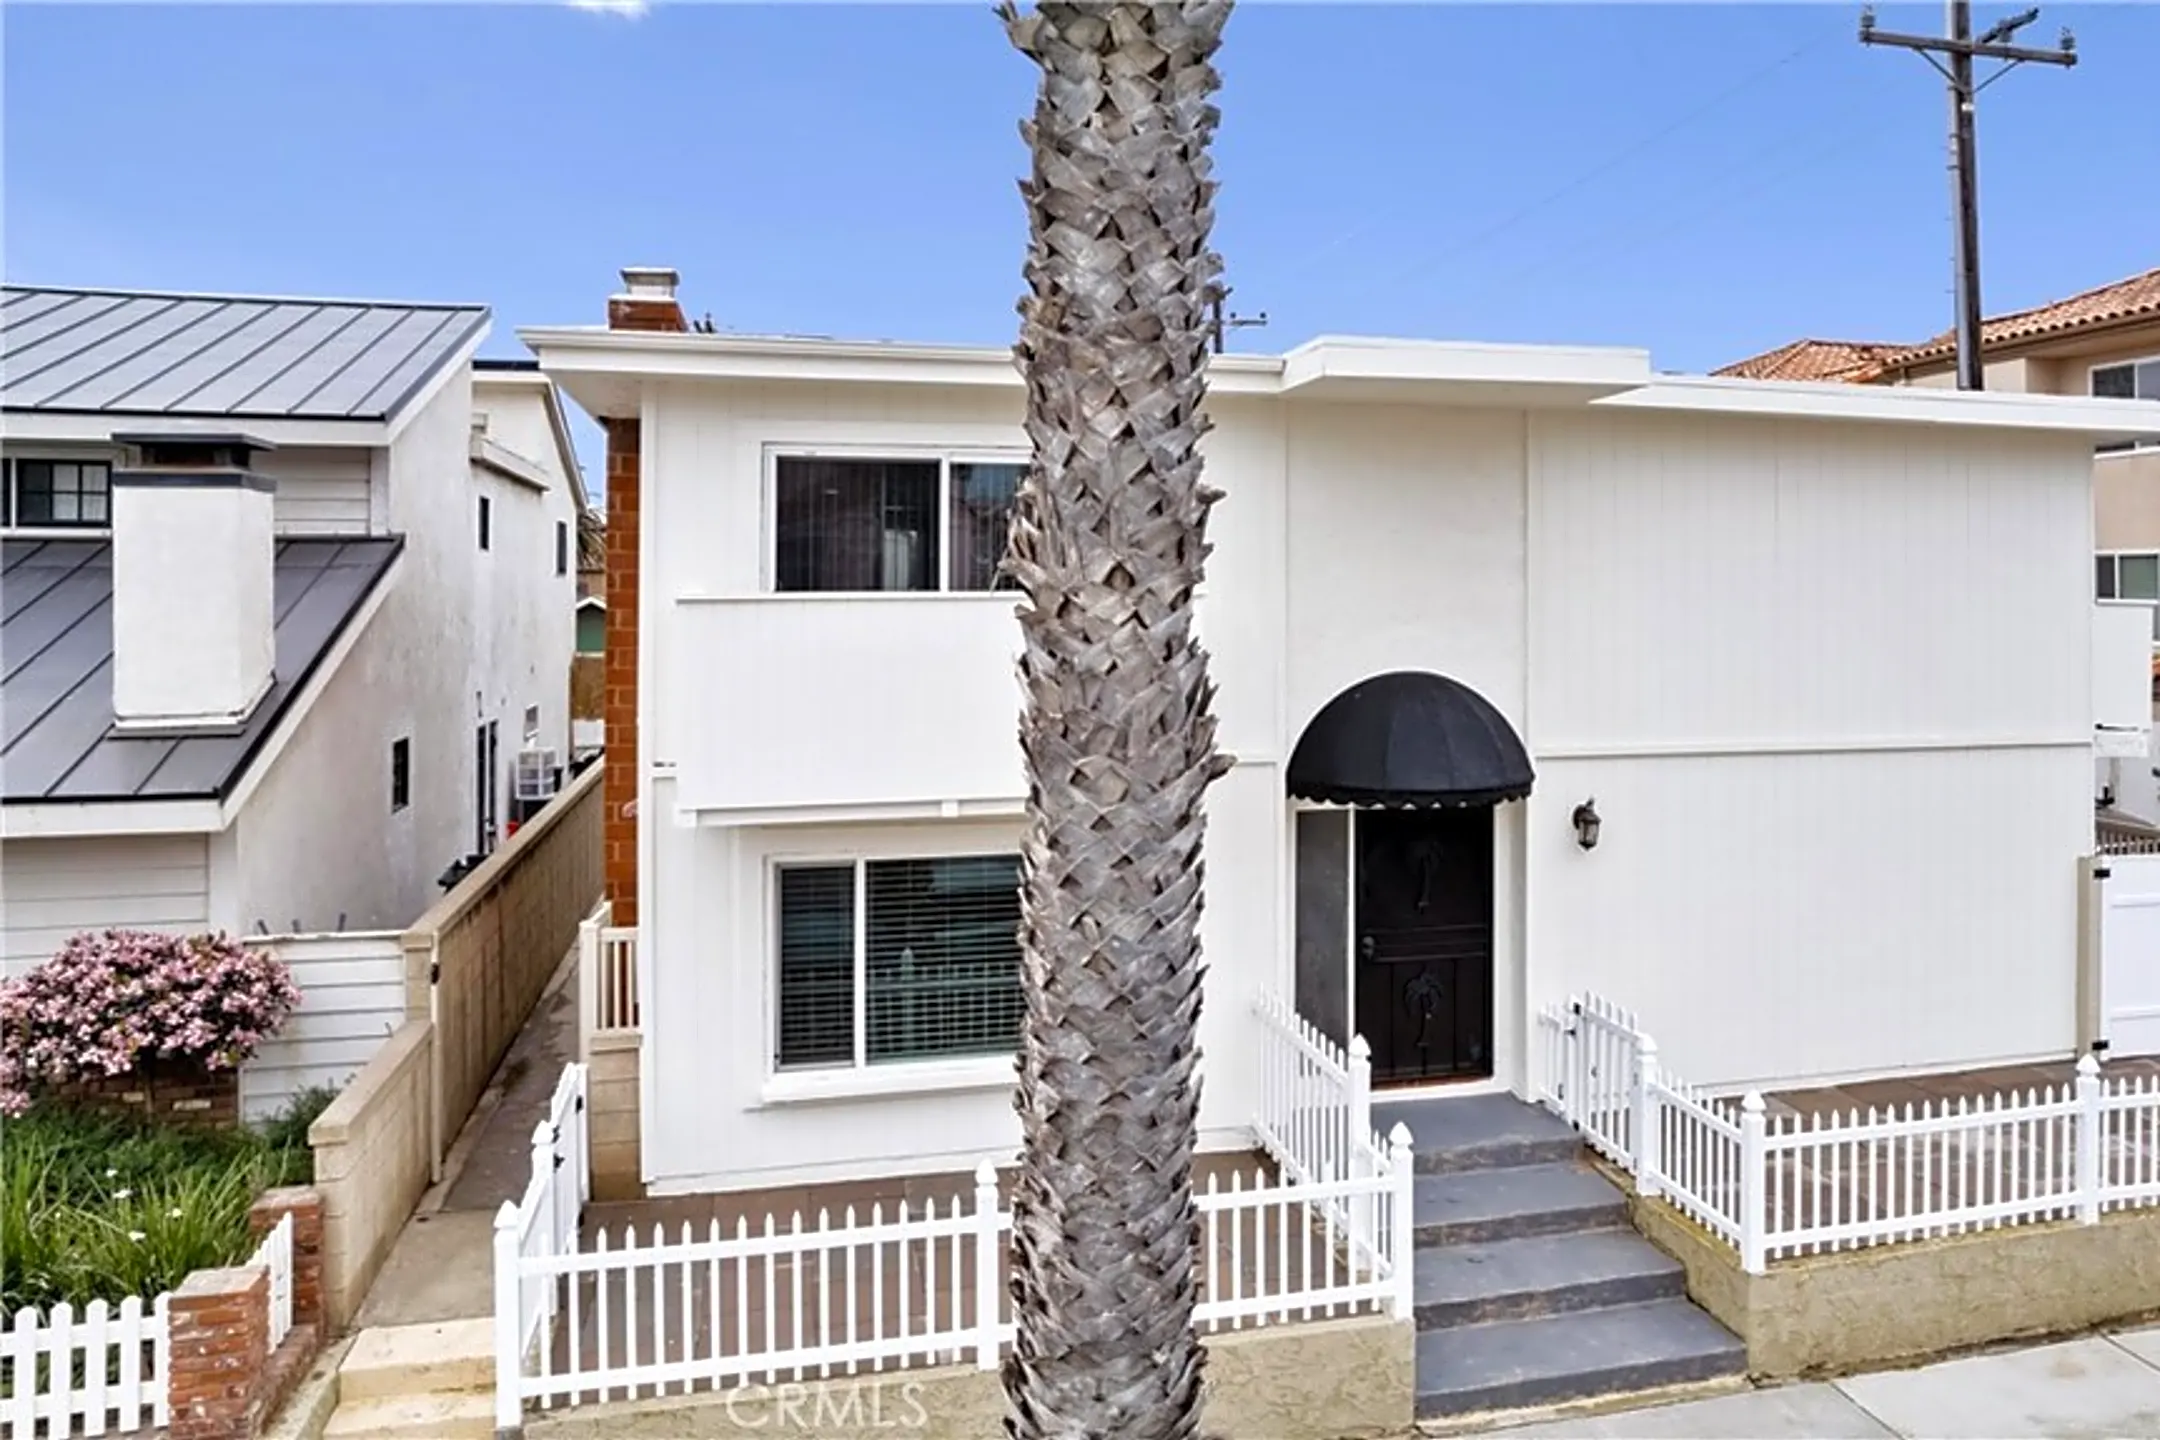 114 10th St | Huntington Beach, CA Apartments for Rent | Rent.